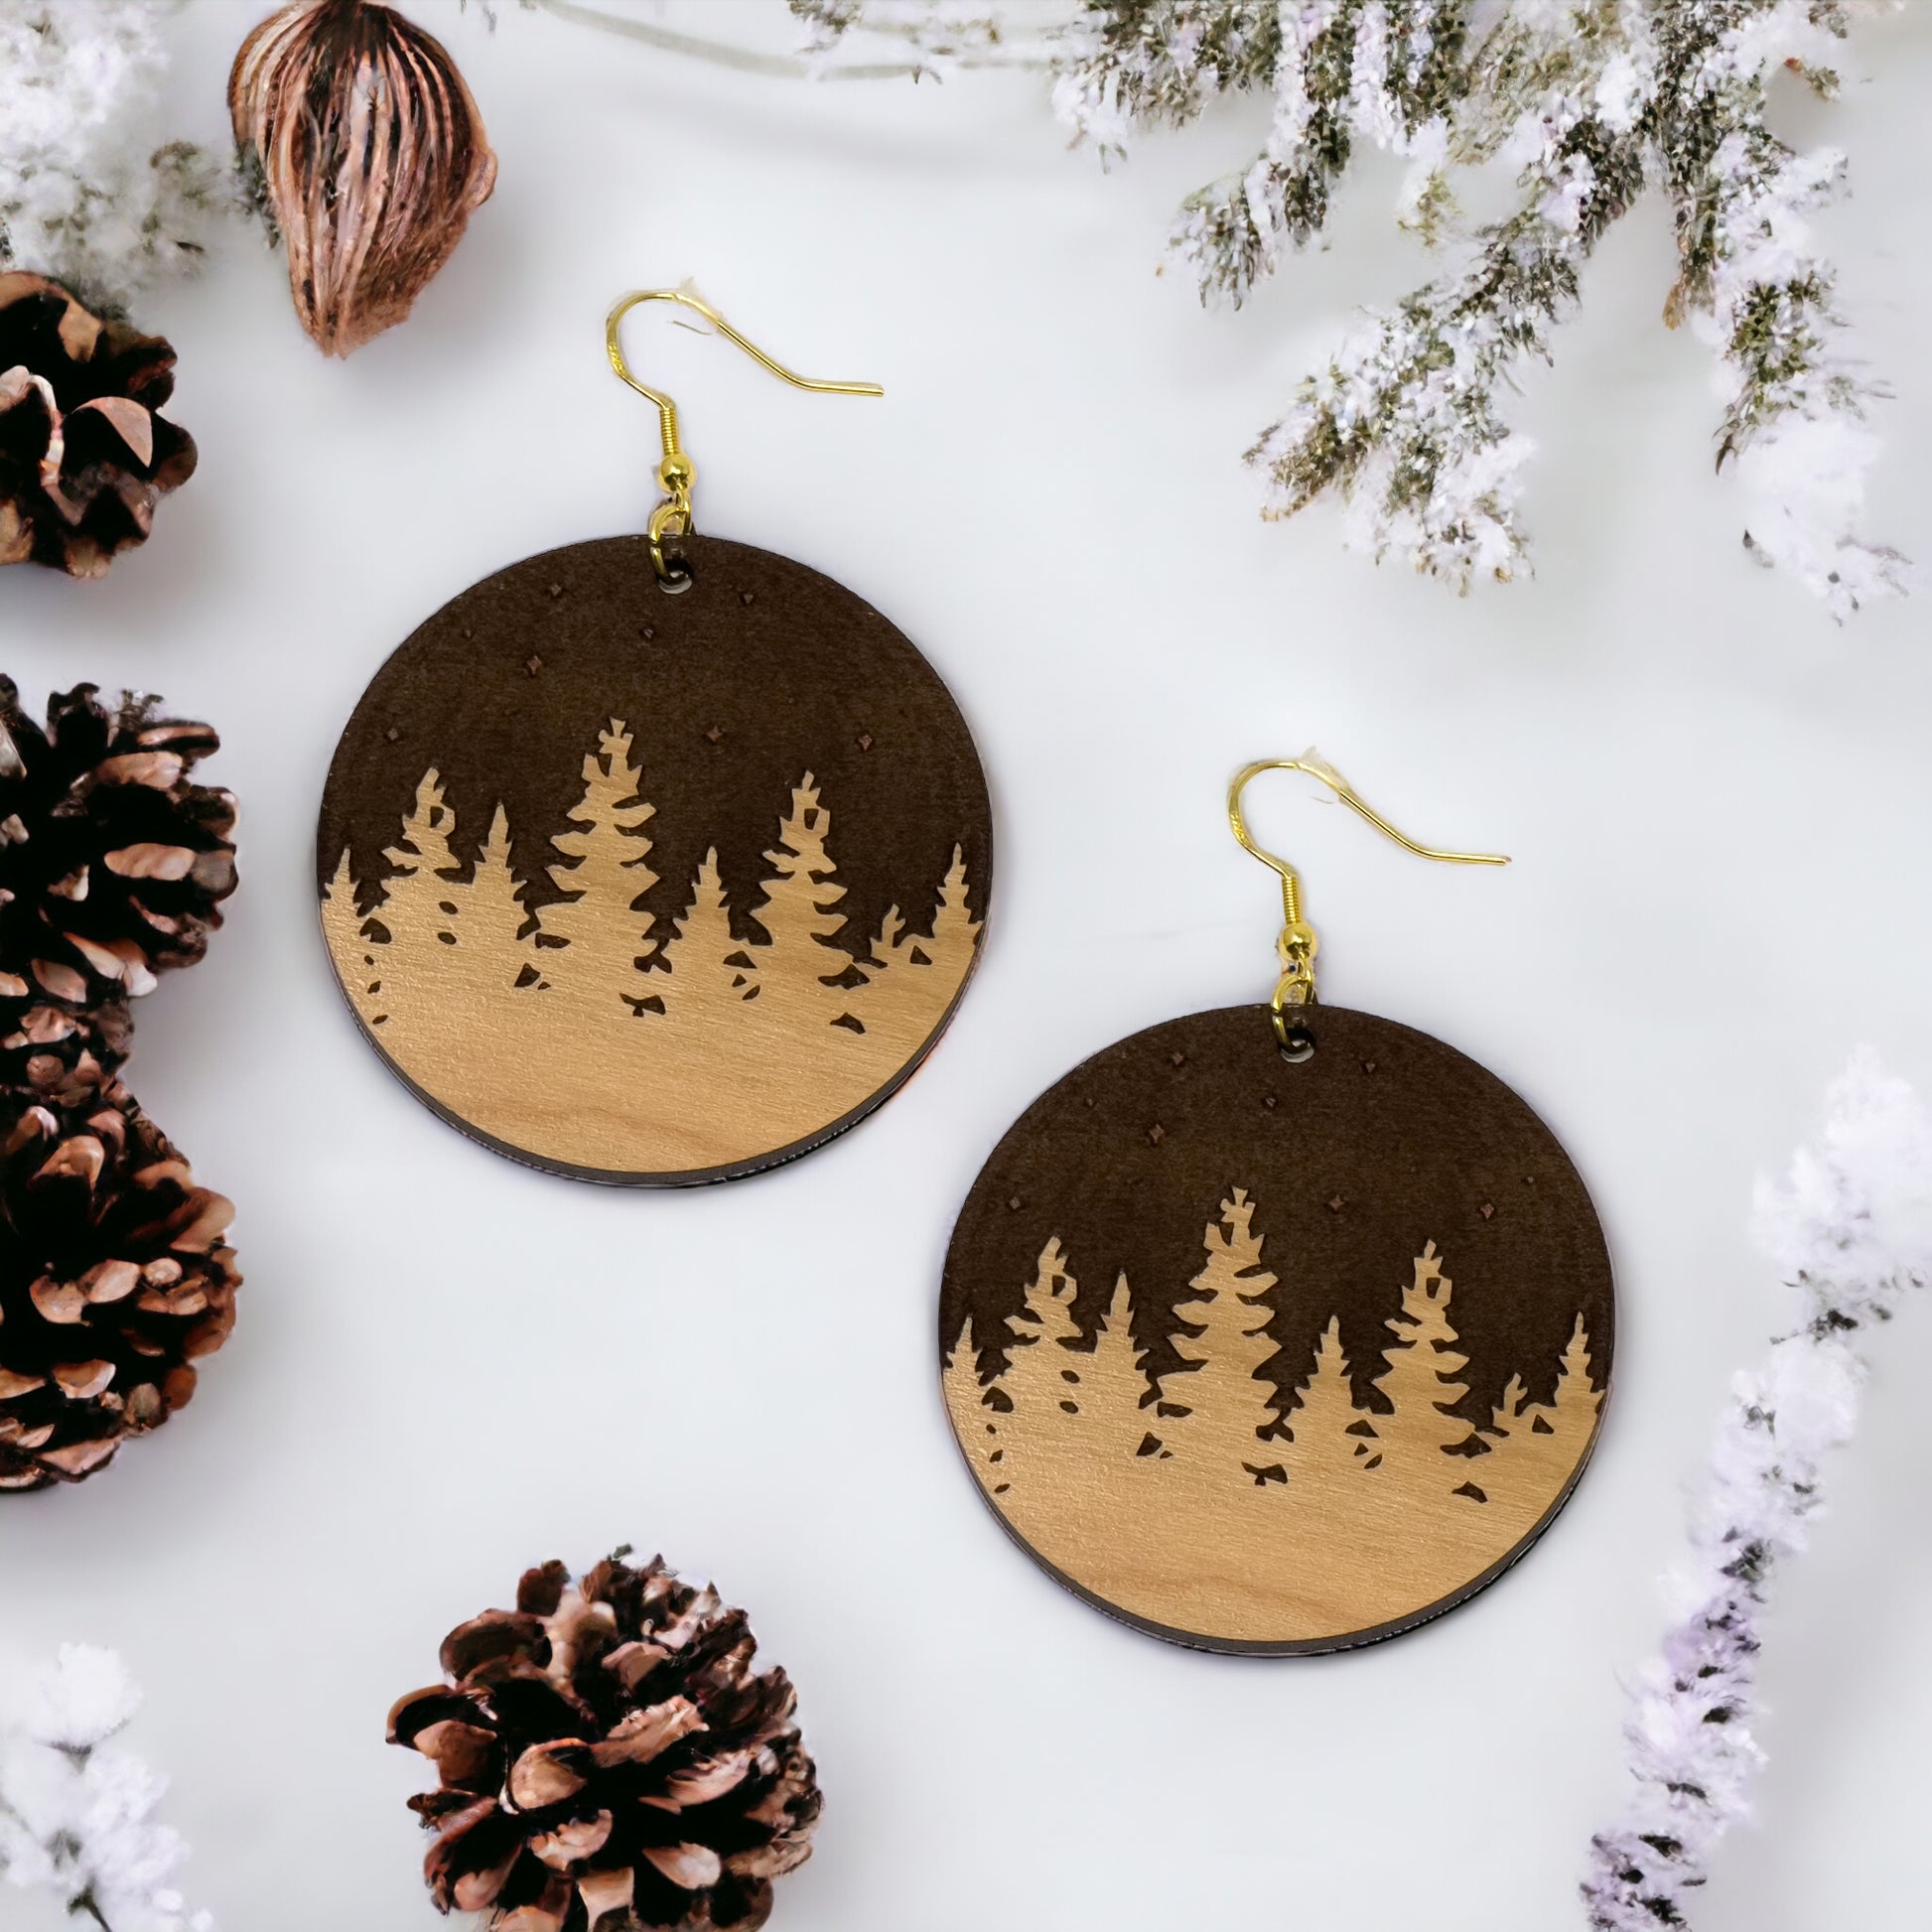 Pine Trees Mountain Earrings, Cute Holiday Christmas Dangle Earrings, Round Wood Earrings, Country Xmas Jewelry, Snowy Forest Nature Gifts